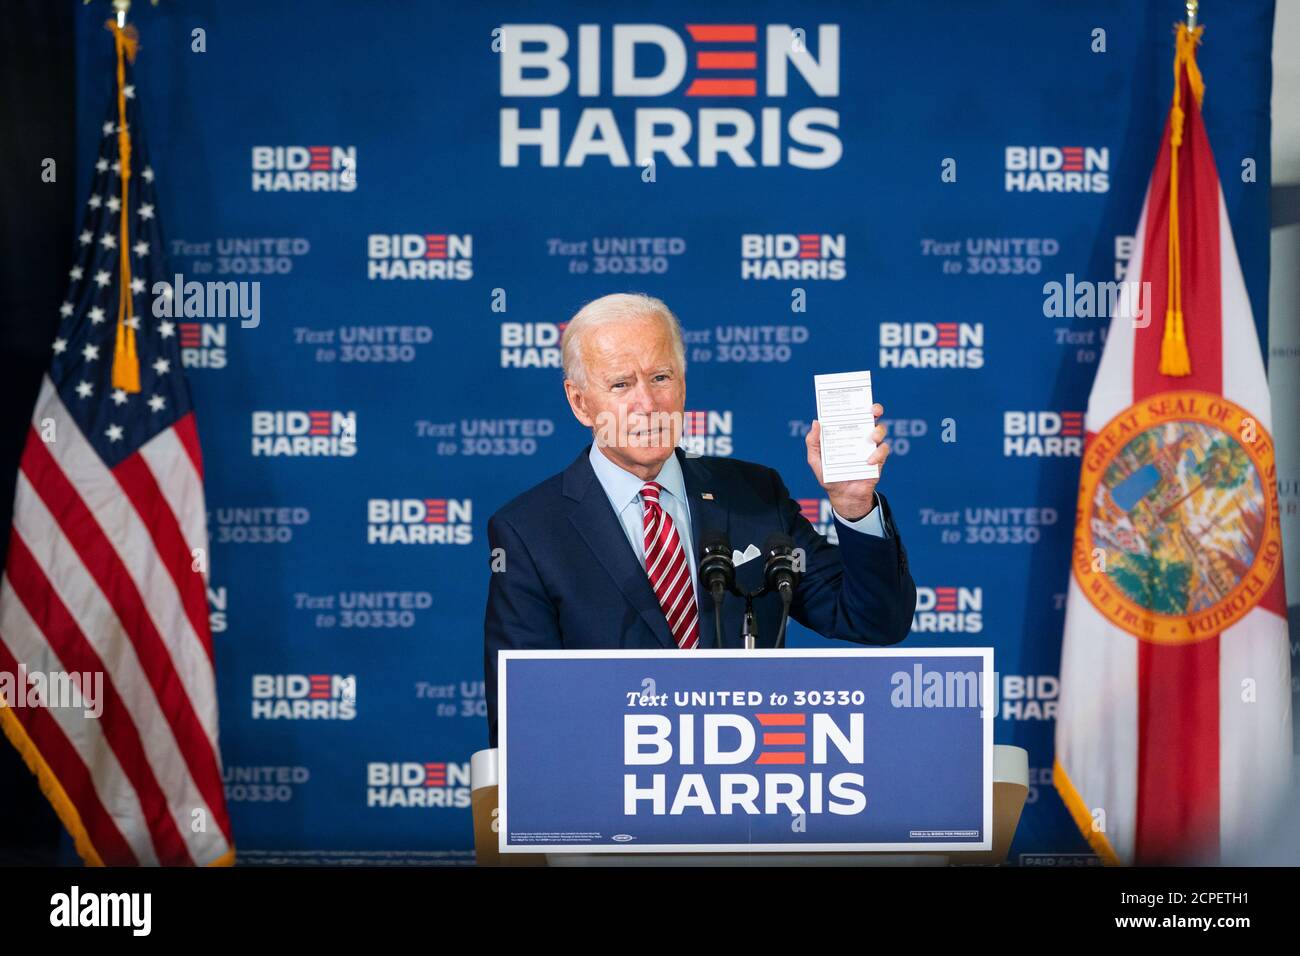 TAMPA, FL, USA - 15 September 2020 - US Democratic presidential candidate Joe Biden attends a round table with US military veterans in Tampa, Florida, Stock Photo